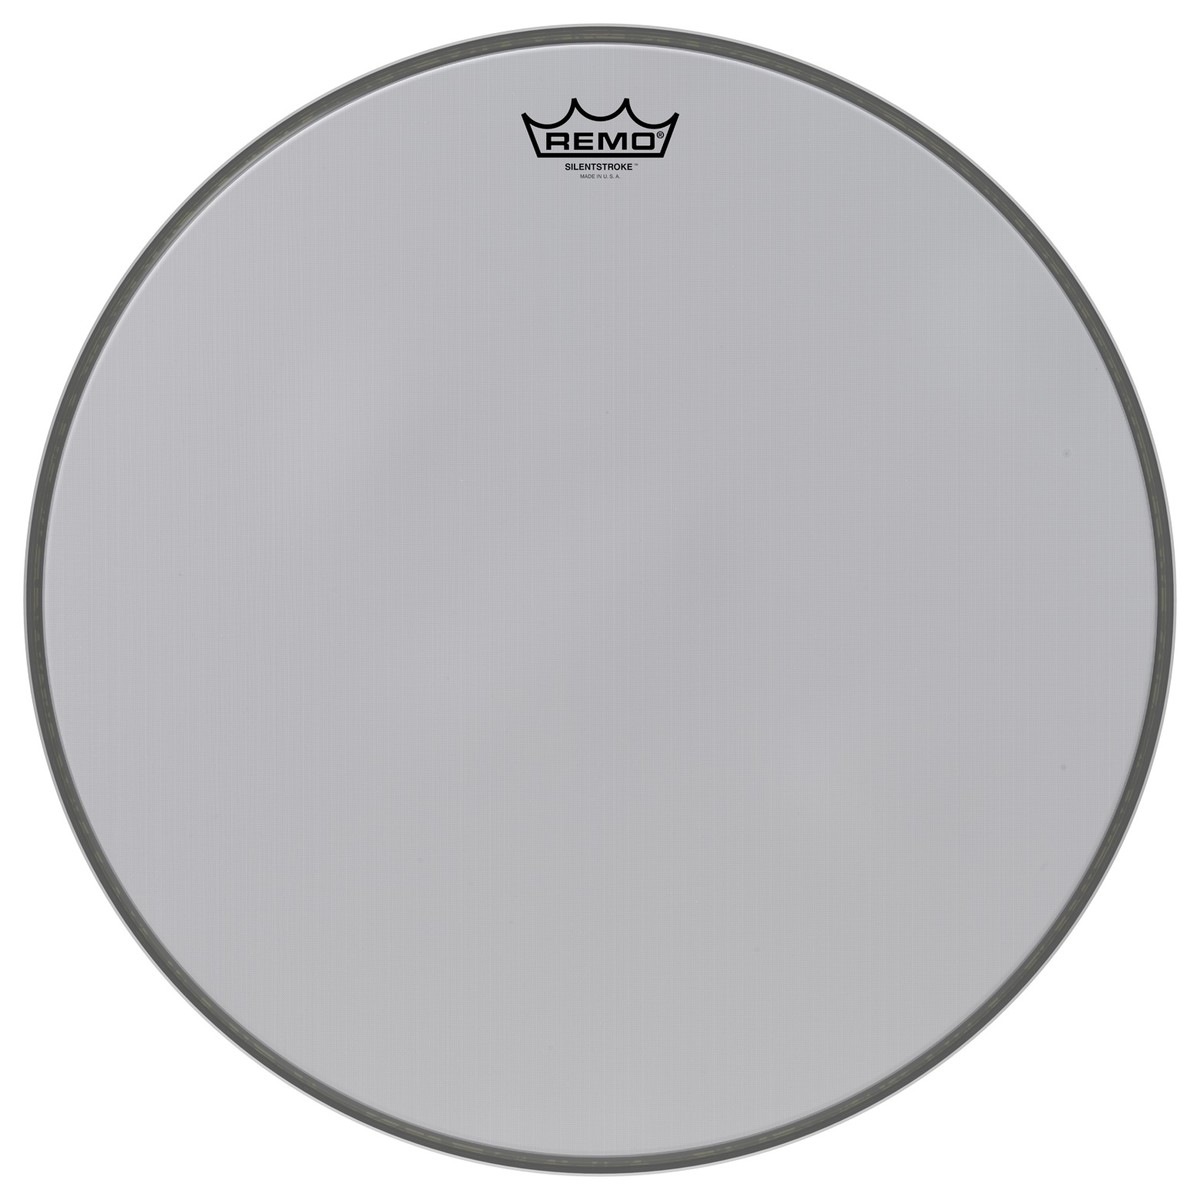 An image of Remo 18" Silentstroke Drum Head